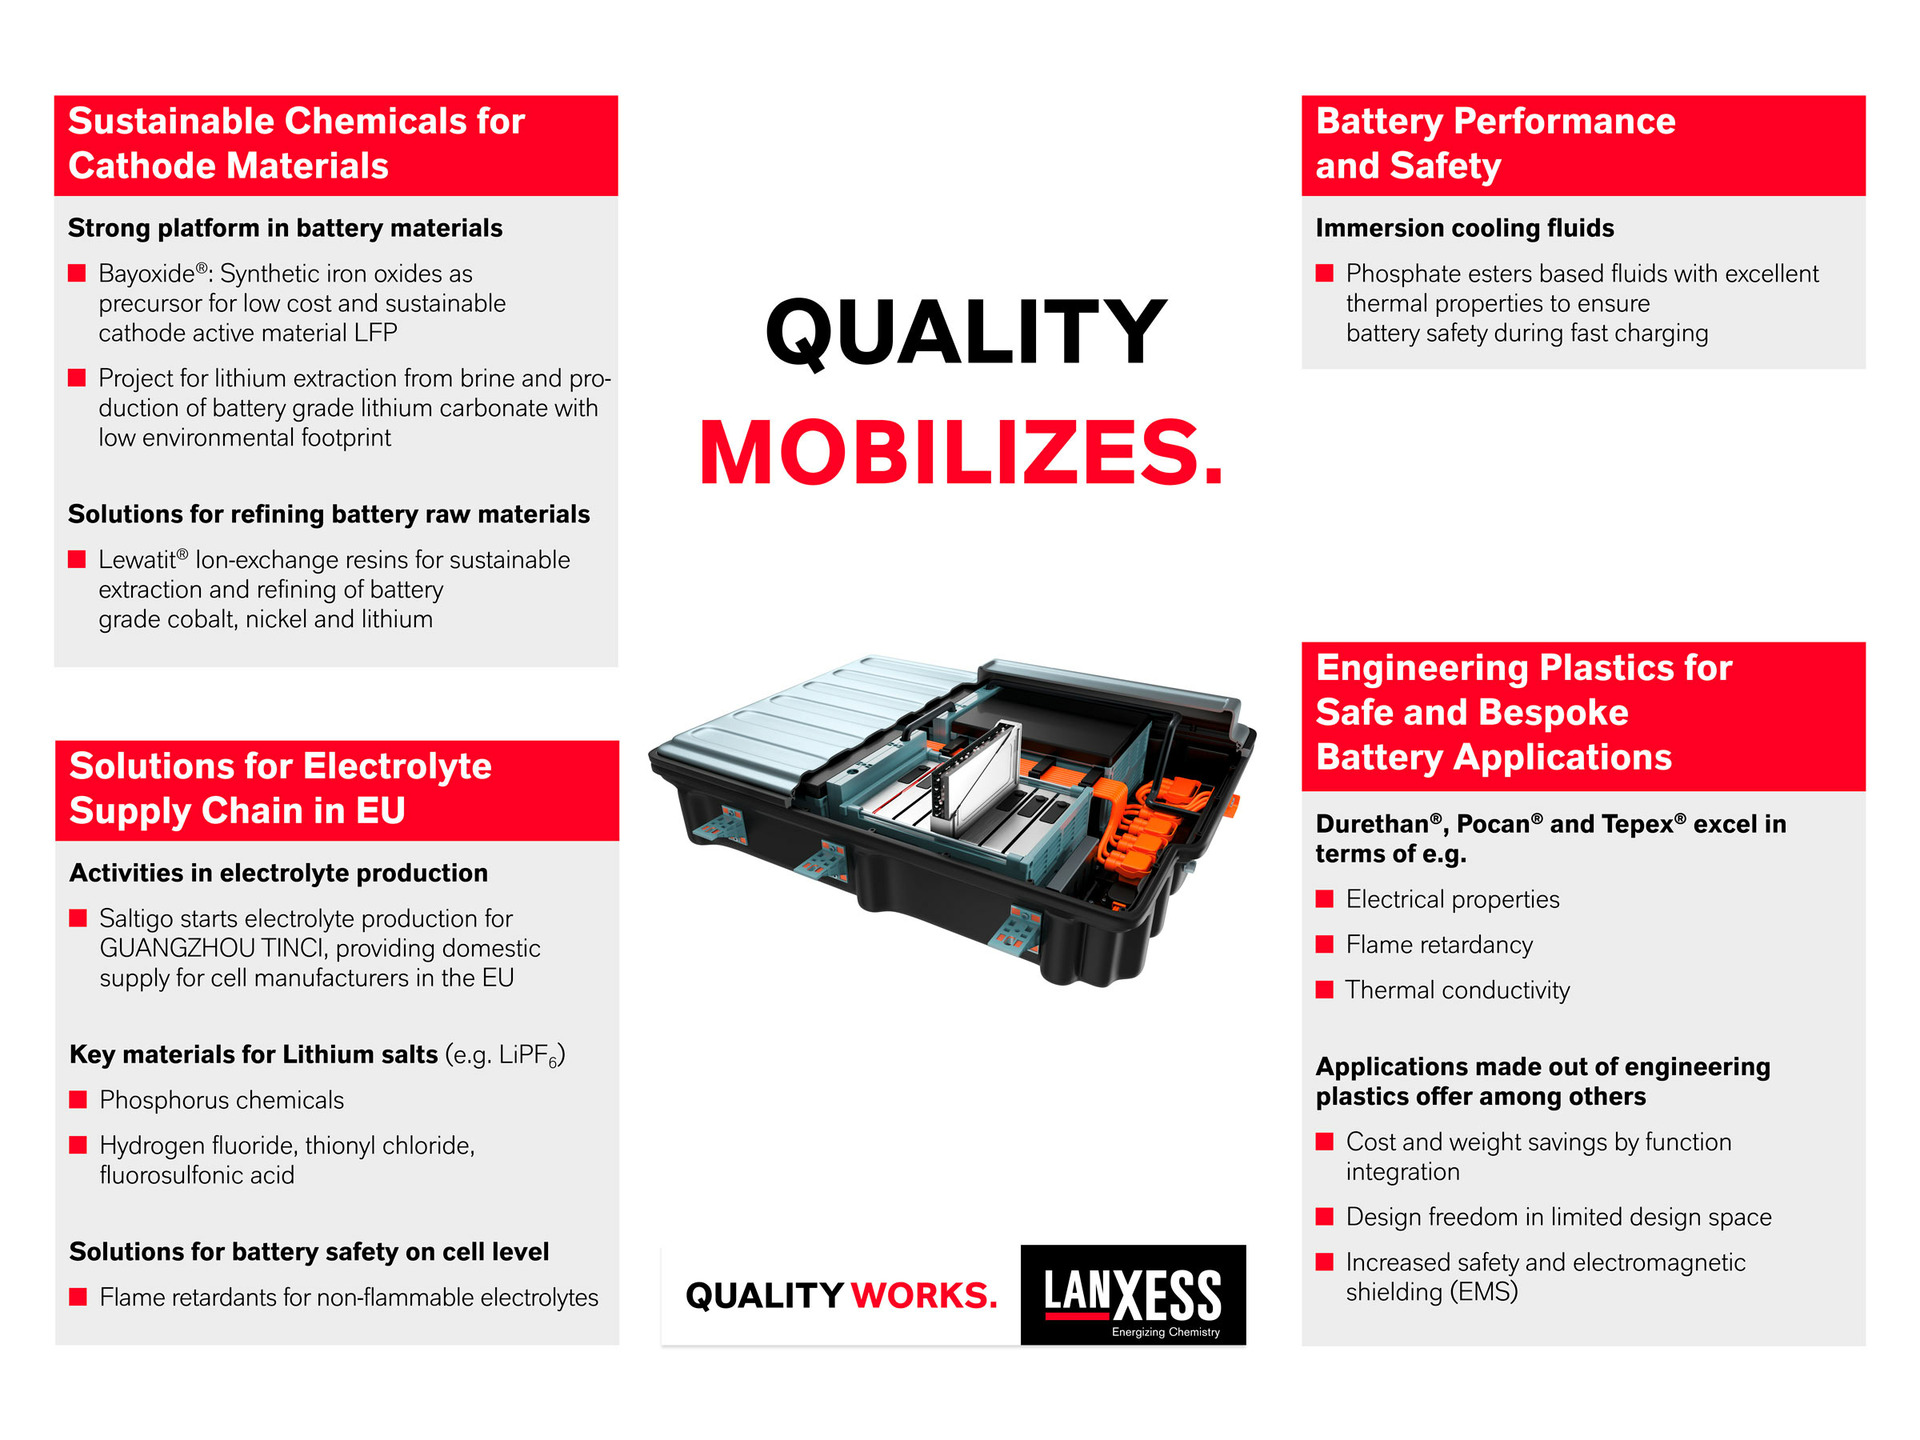 LANXESS products in the battery of an electric car.